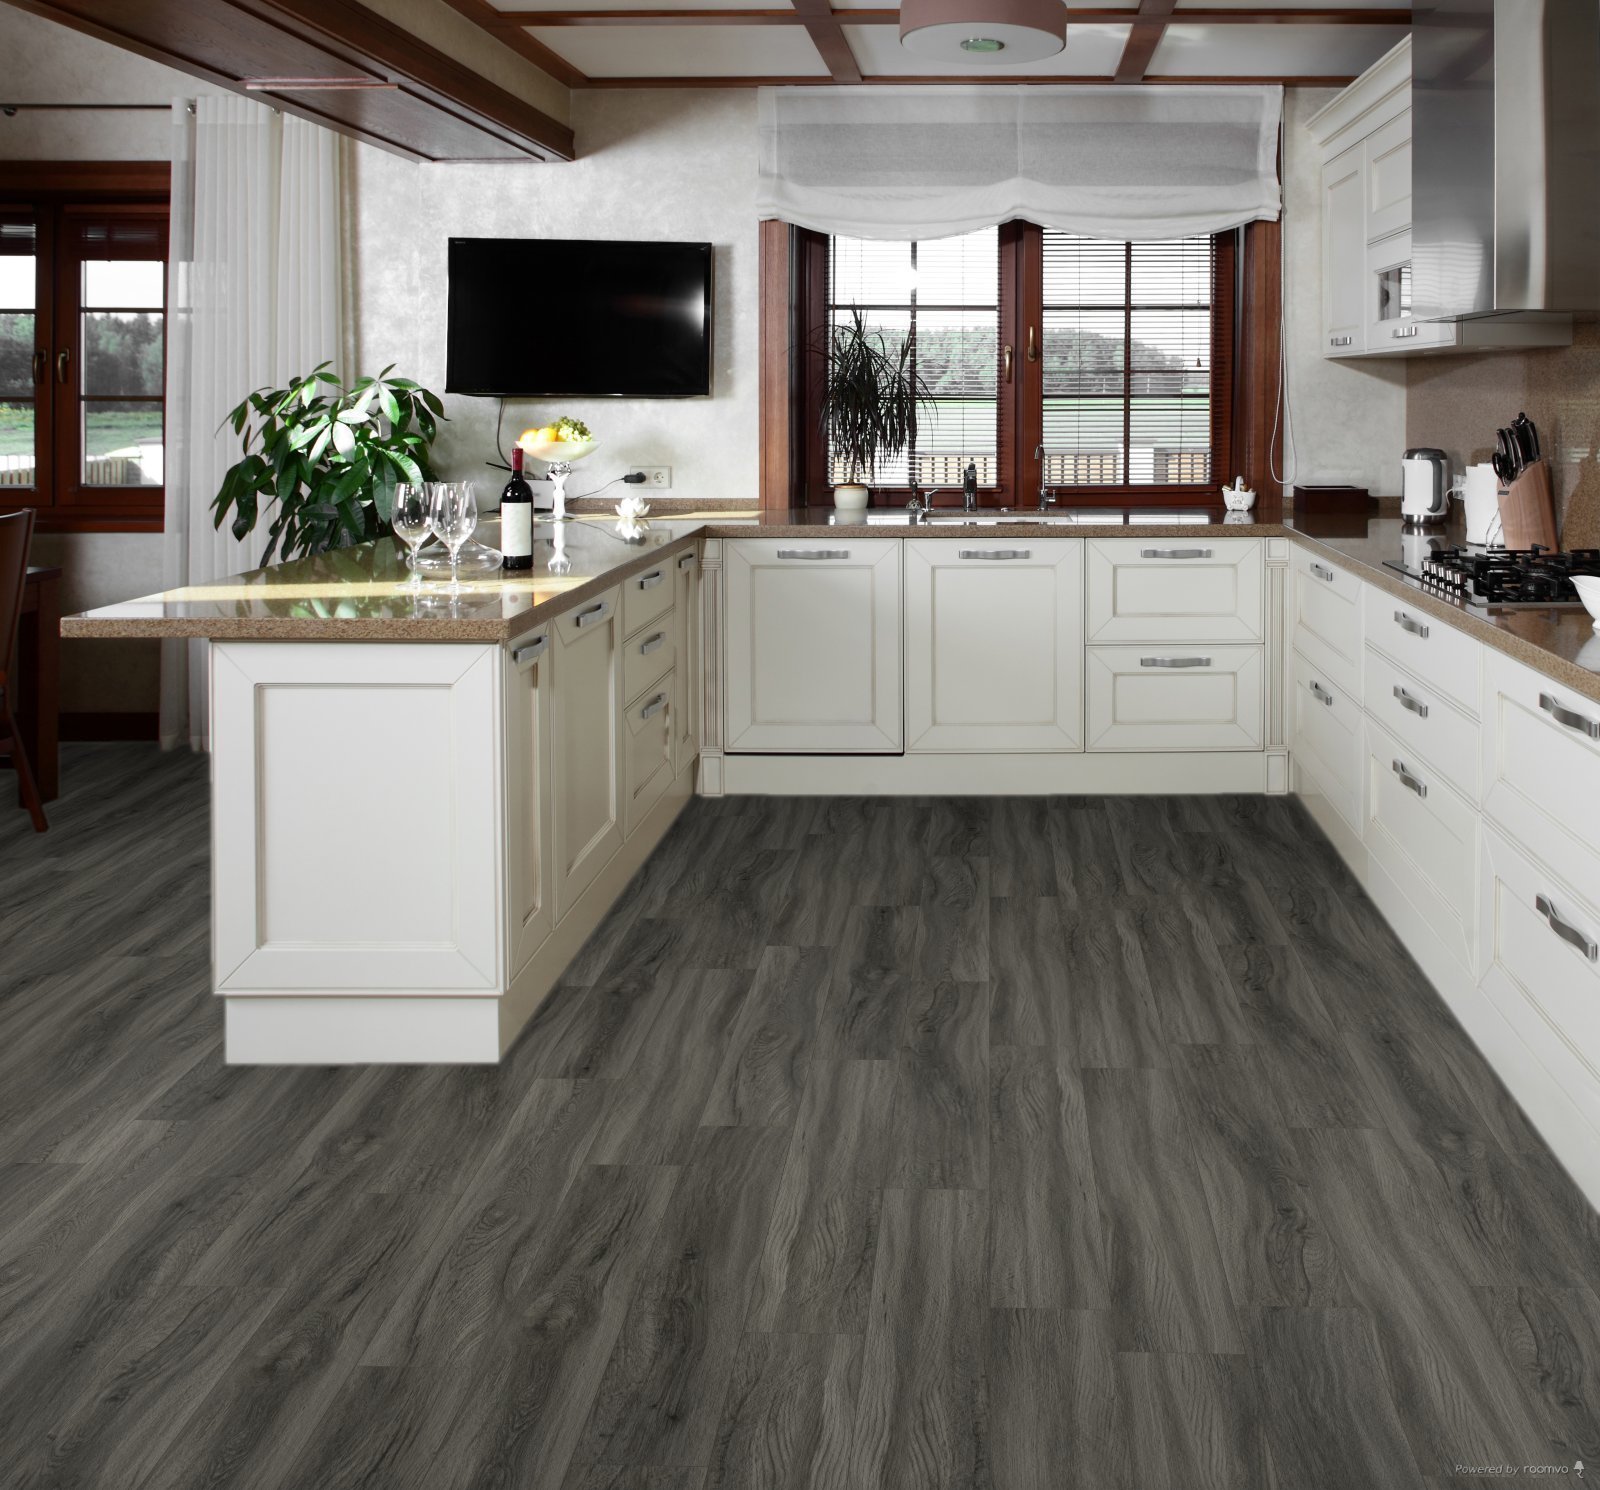 Horizen Flooring presents to you a picture of a quality wide plank Cambridge luxury vinyl plank. NovoCore Premium EIR collection features a wide range of colors & designs that will compliment any interior. Natural wood grain synchronized surface allow for an authentic hardwood look & feel. This collection features a 0.25″ / 6.5 mm overall thickness and a durable 22 mil / 0.55 mm wear layer for residential and commercial applications.